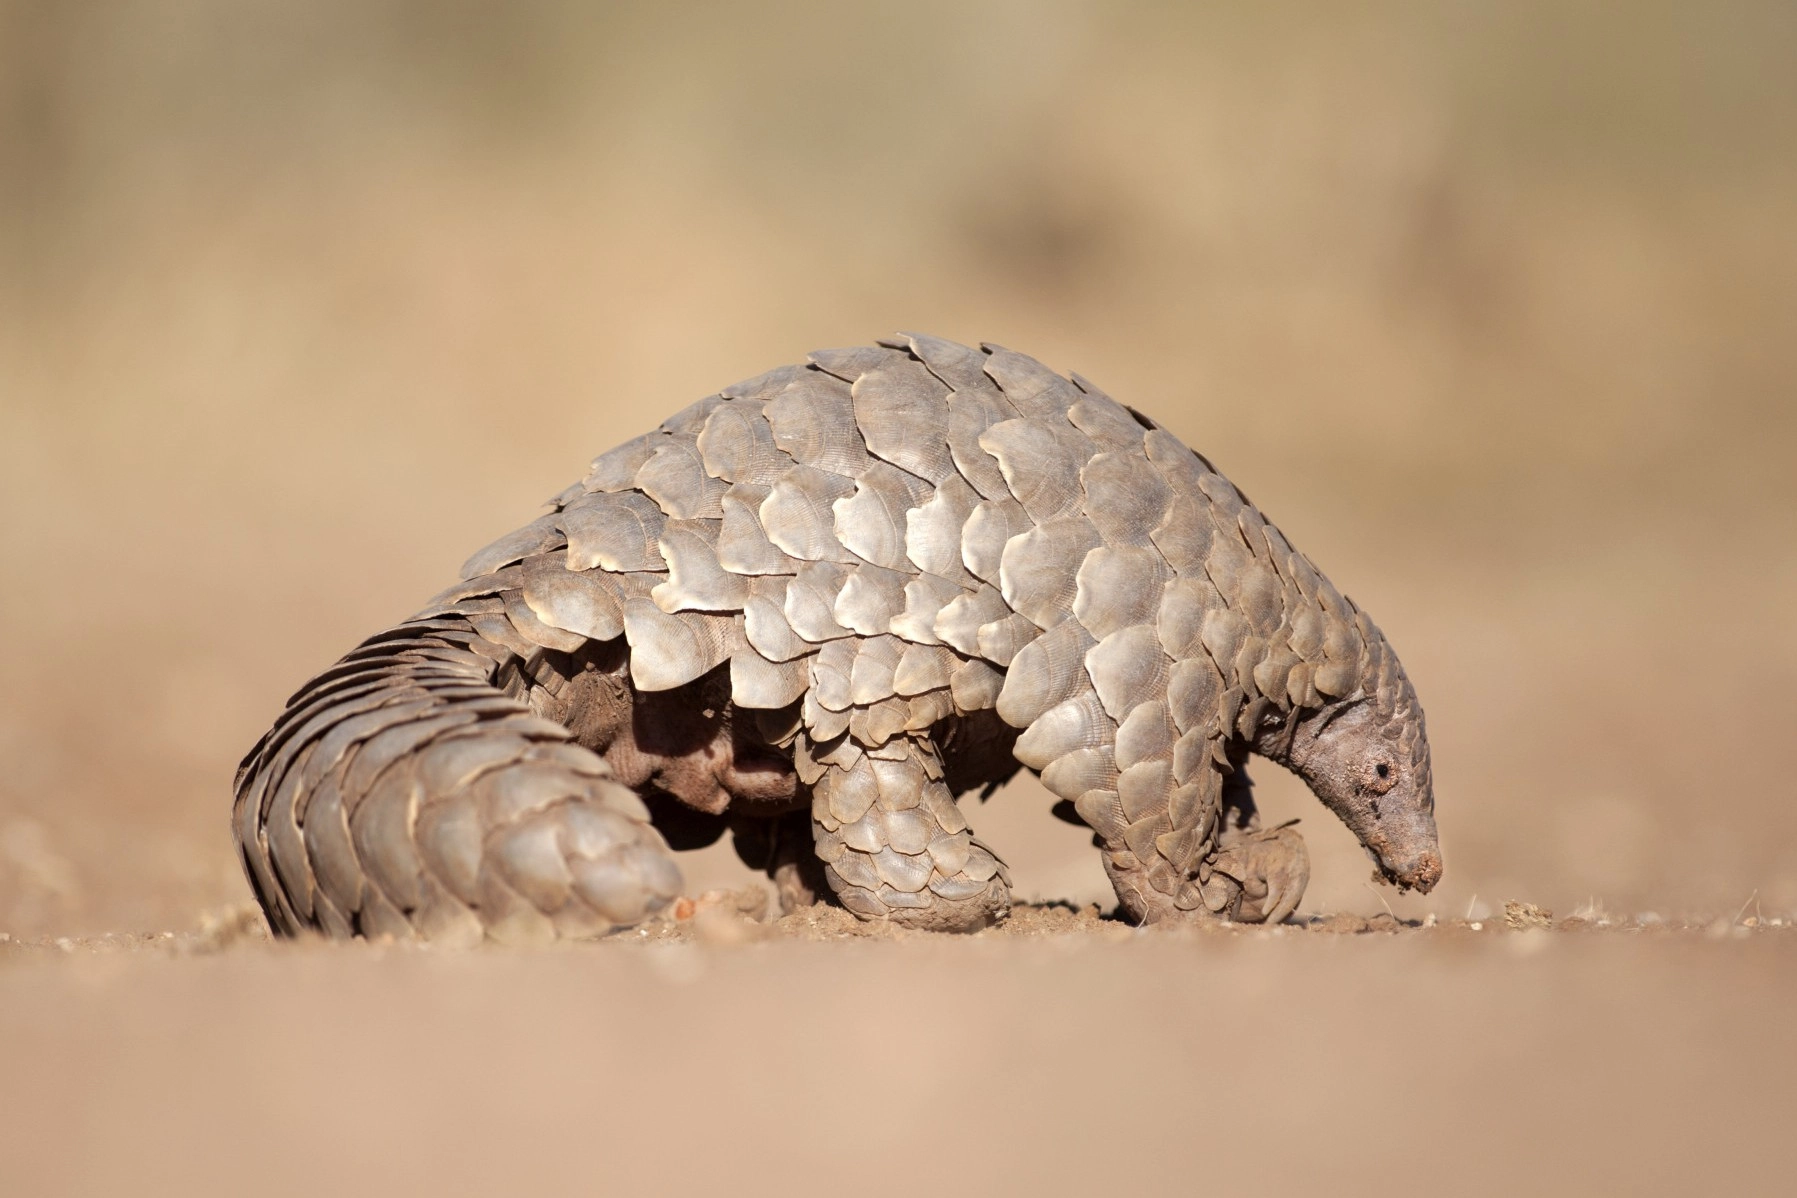 A pangolin in the wild